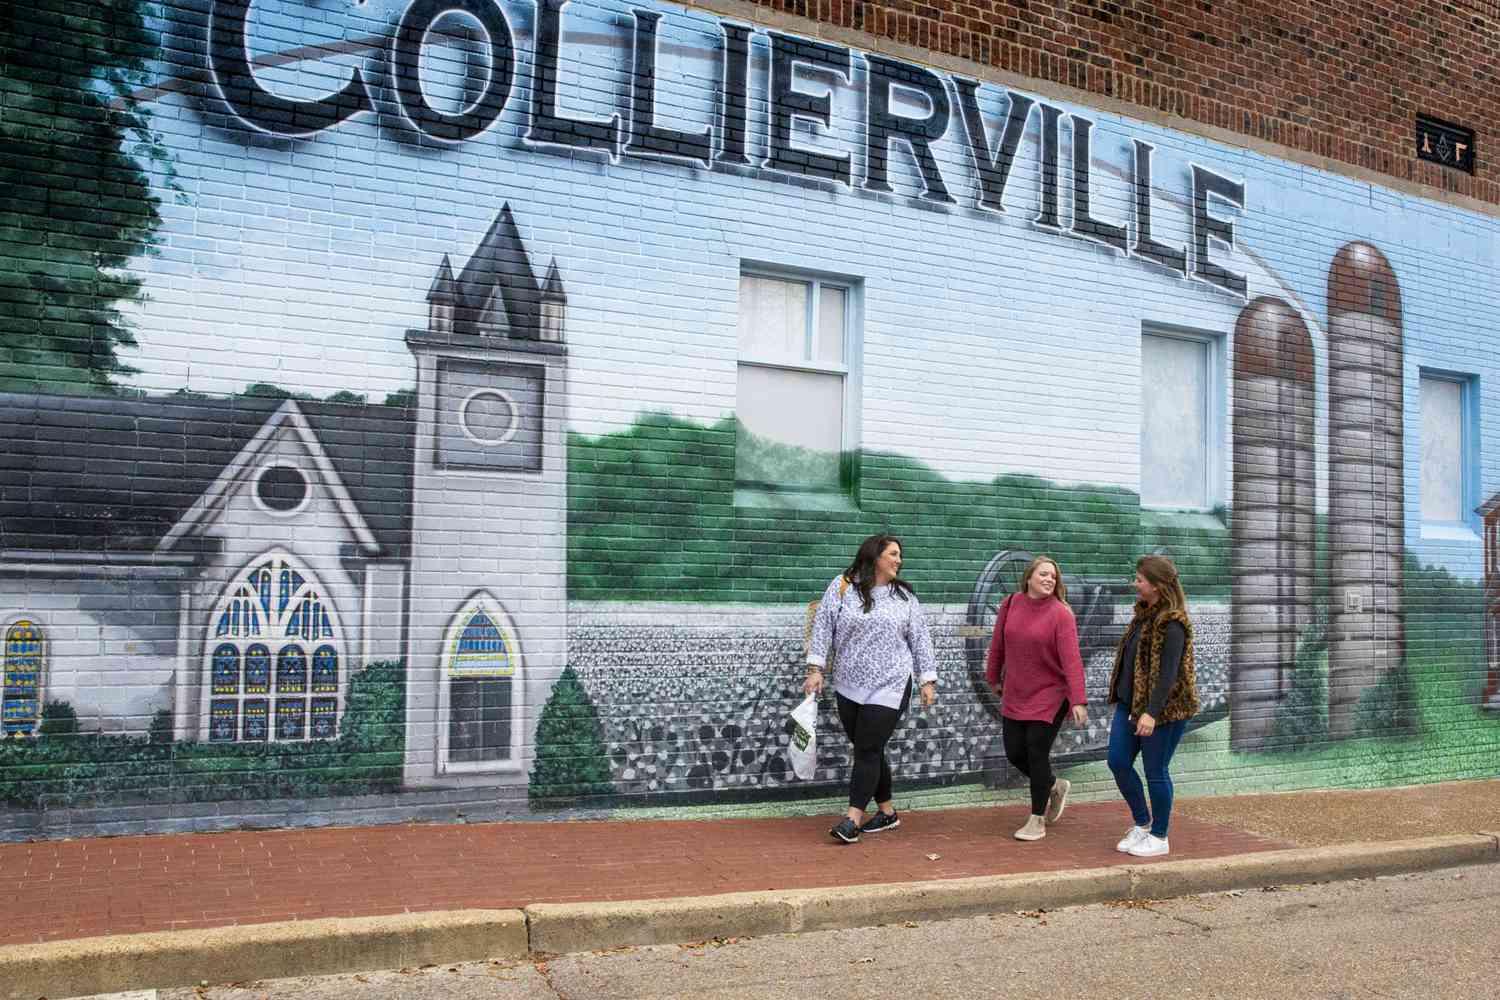 15 Facts About Art And Music Scene In Collierville, Tennessee - Facts.net